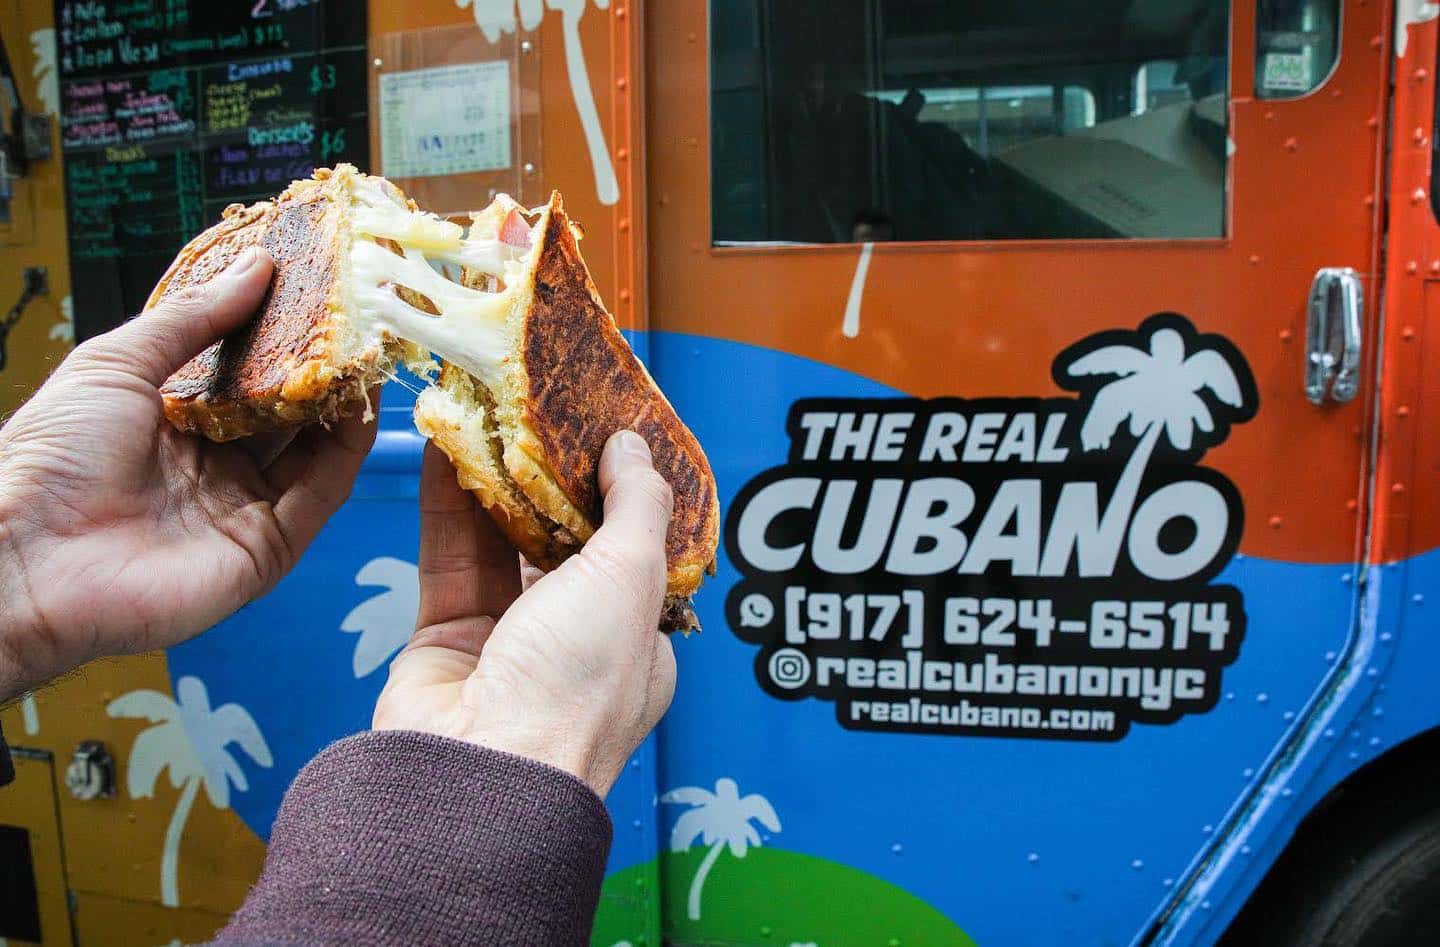 Ham and cheese sandwich from The Real Cubano food truck located in NYC